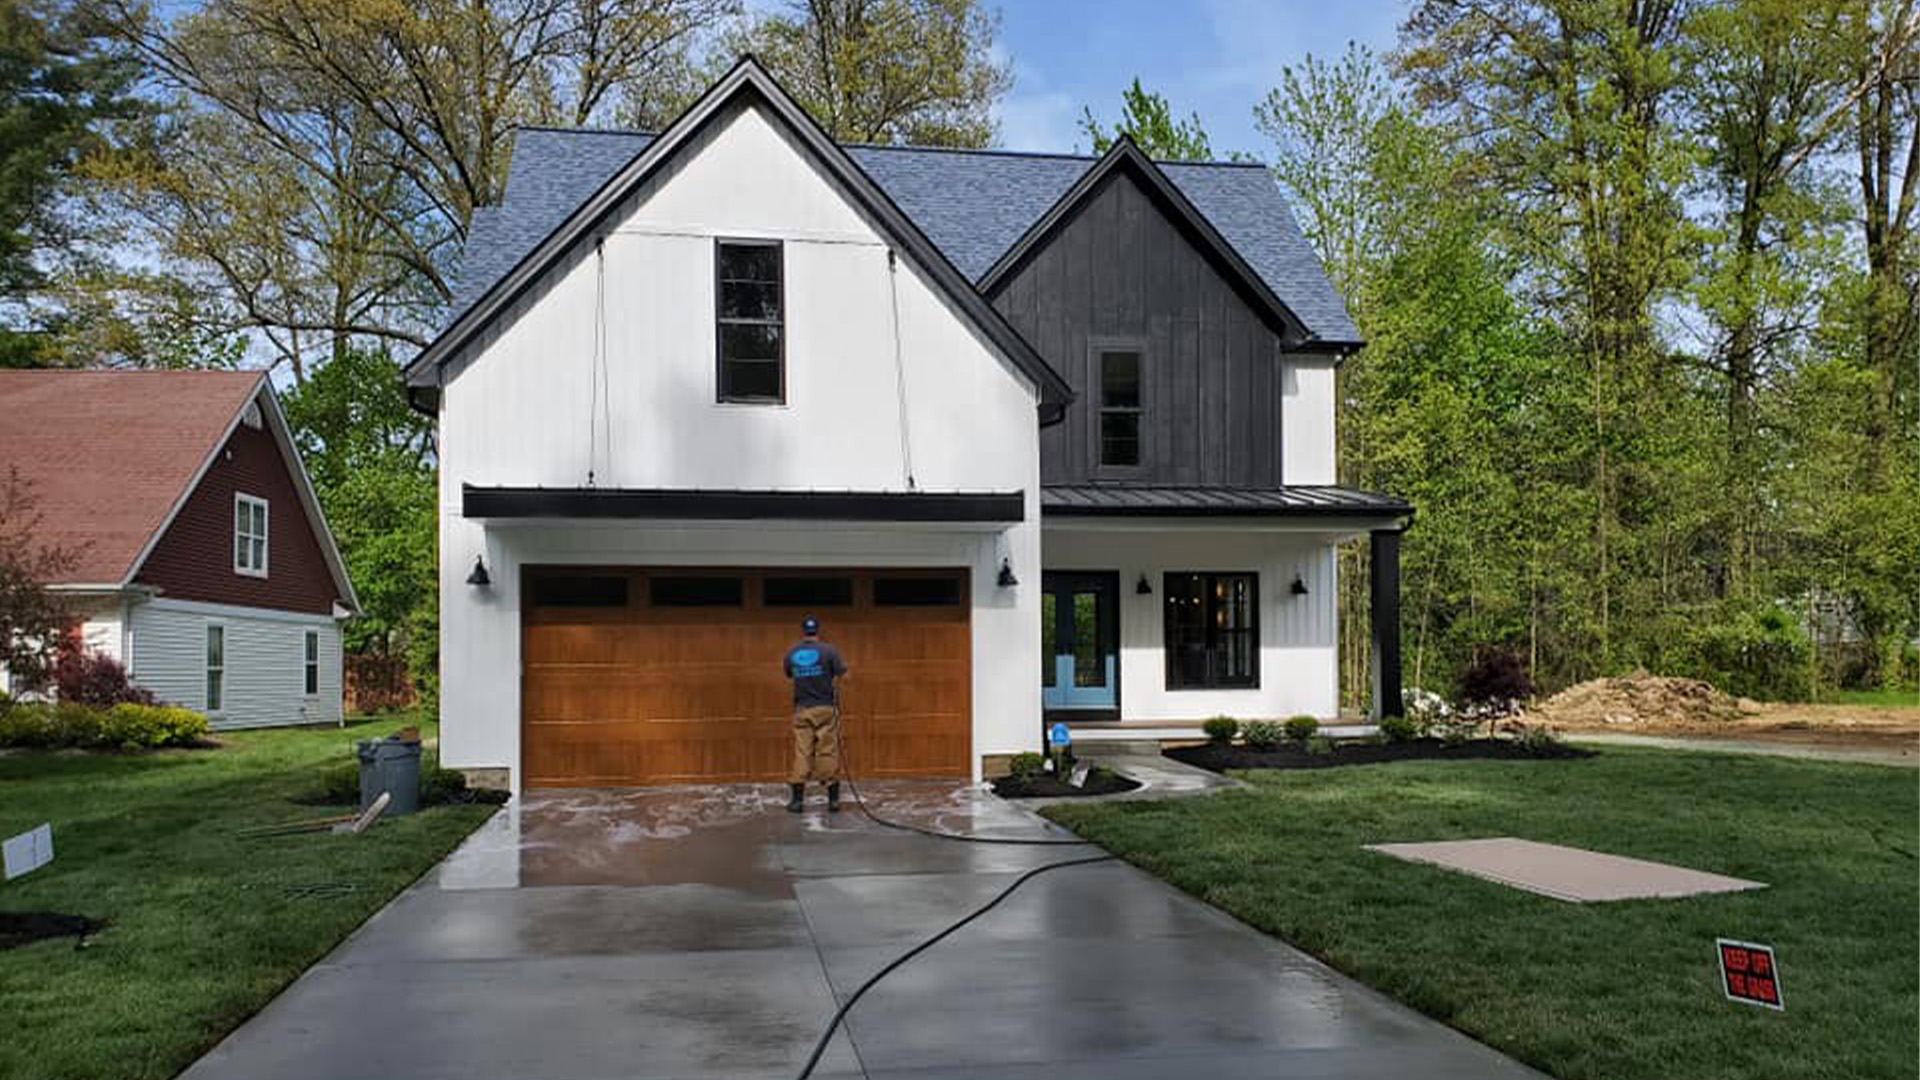 Willoughby Pressure Washing,Pressure Washing Willoughby,Willoughby Driveway Cleaning,Driveway Cleaning Willoughby,Willoughby Roof Cleaning,Roof Cleaning Willoughby,Willoughby Roof Pressure Washing,Roof Pressure Washing Willoughby,Willoughby Driveway Pressure Washing,Driveway Pressure Washing Willoughby,Willoughby Window Washing,Window Washing Willoughby